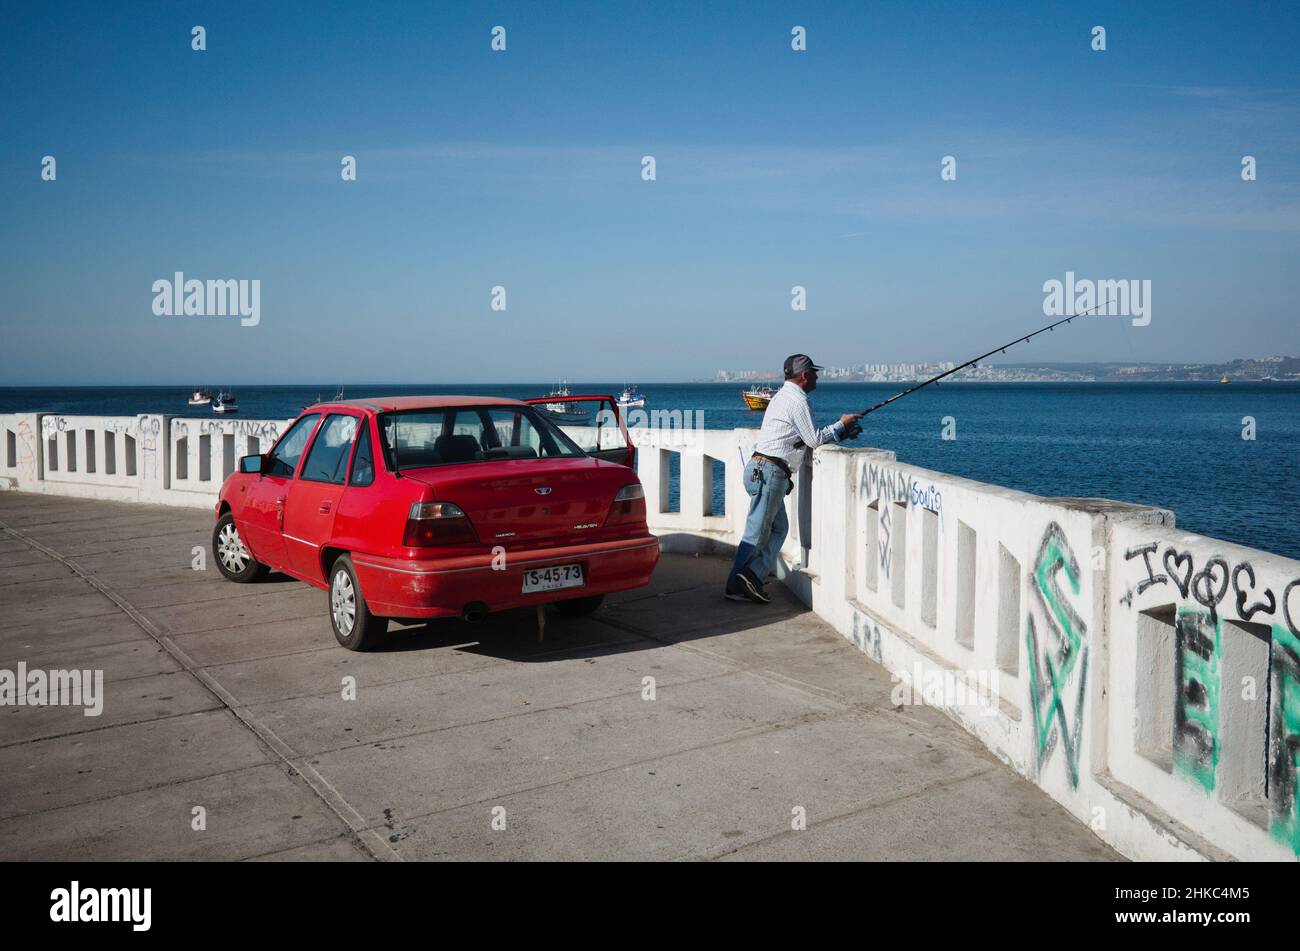 Valparaiso, Chile - February, 2020: Man with fishing rod is fishing on seafront of Valparaiso city. Red Daewoo car is parked on embankment Stock Photo